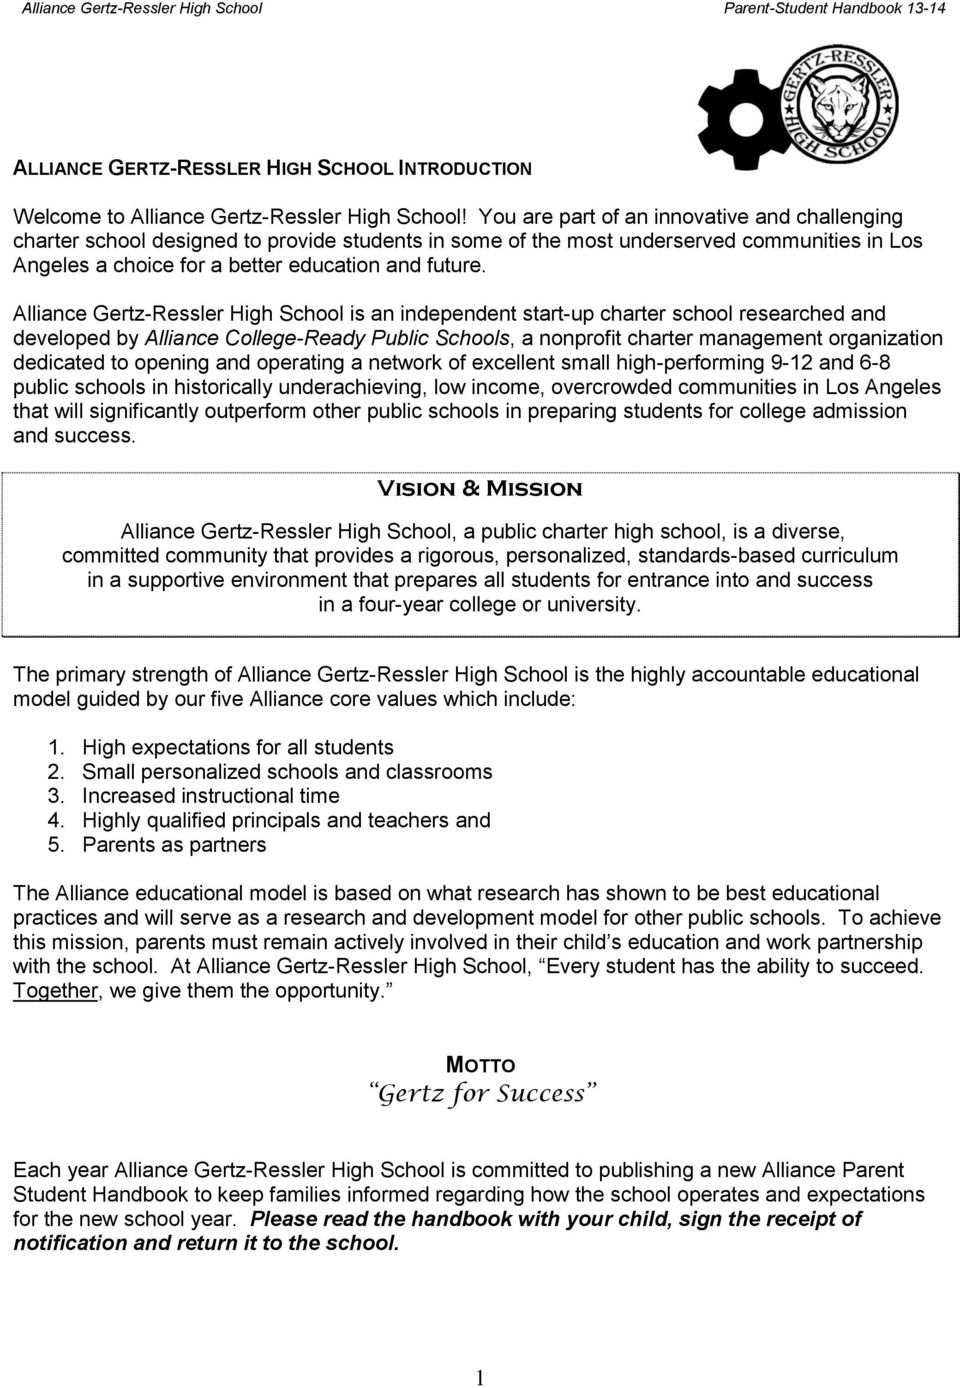 Alliance Gertz-Ressler High School is an independent start-up charter school researched and developed by Alliance College-Ready Public Schools, a nonprofit charter management organization dedicated